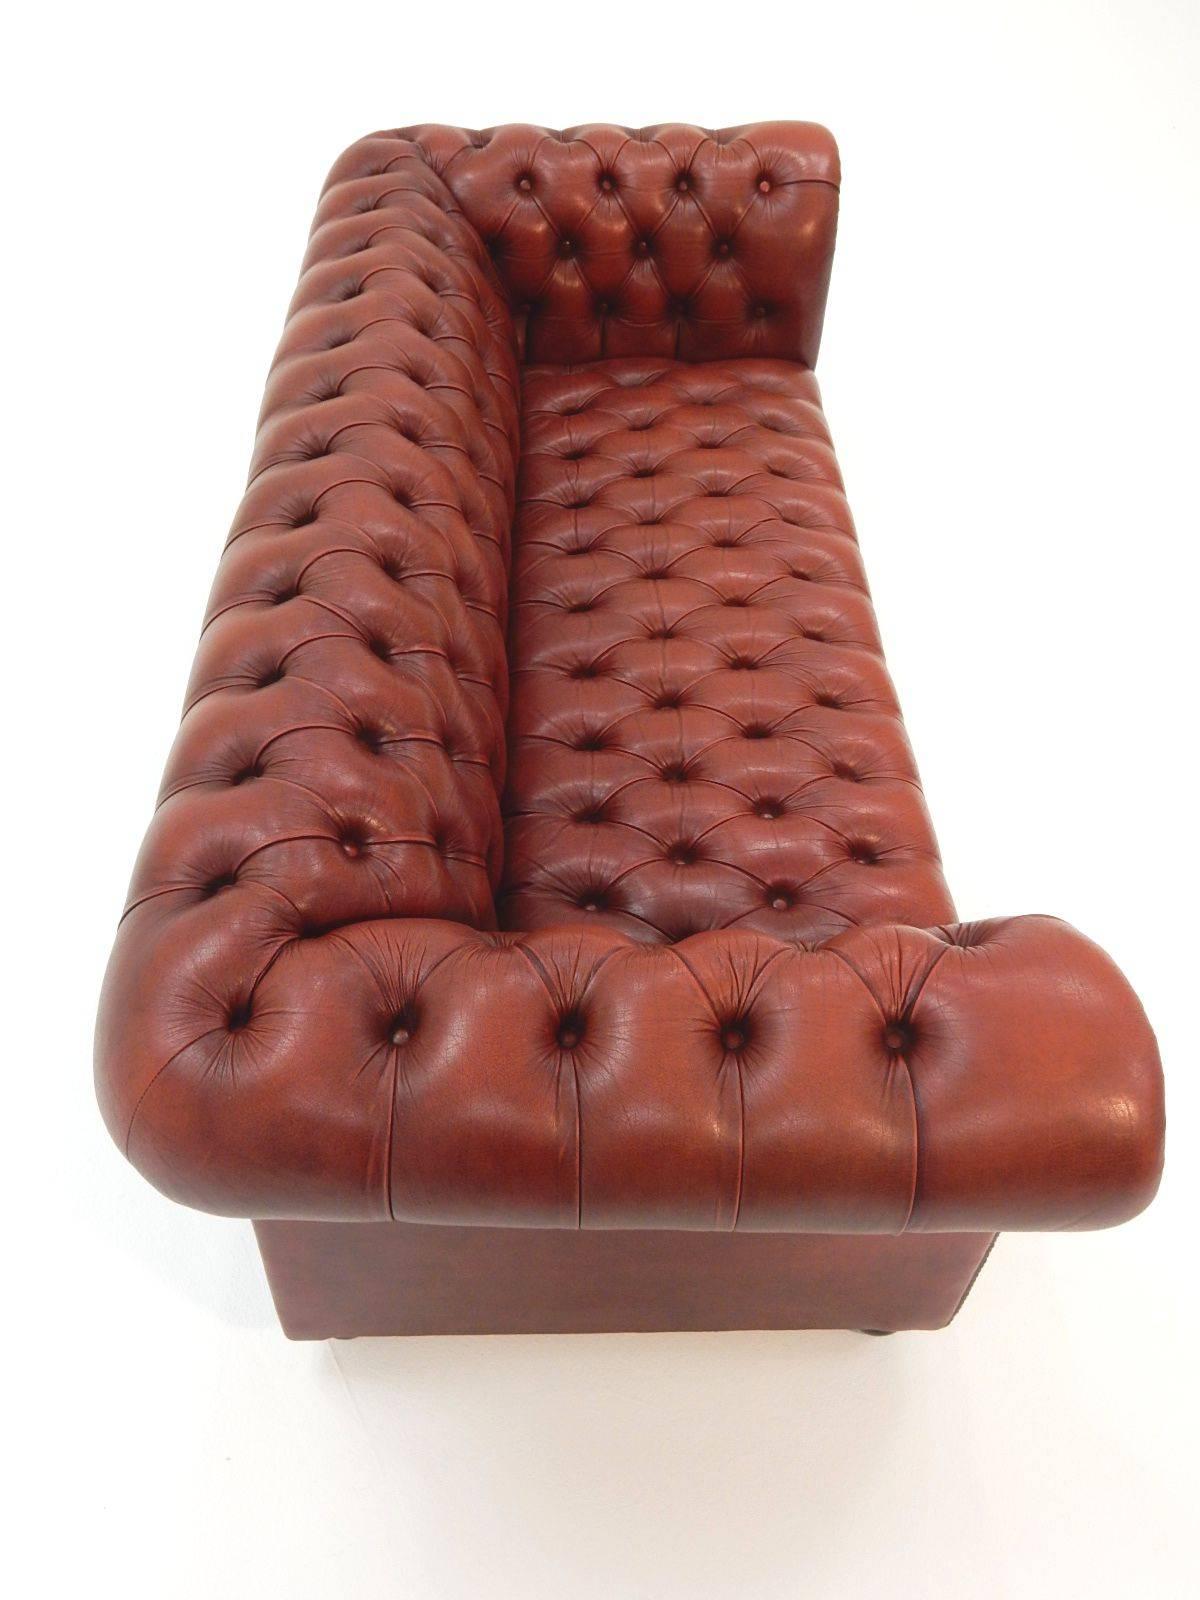 British Colonial Fabulous Tufted Oxblood Leather British Chesterfield Sofa